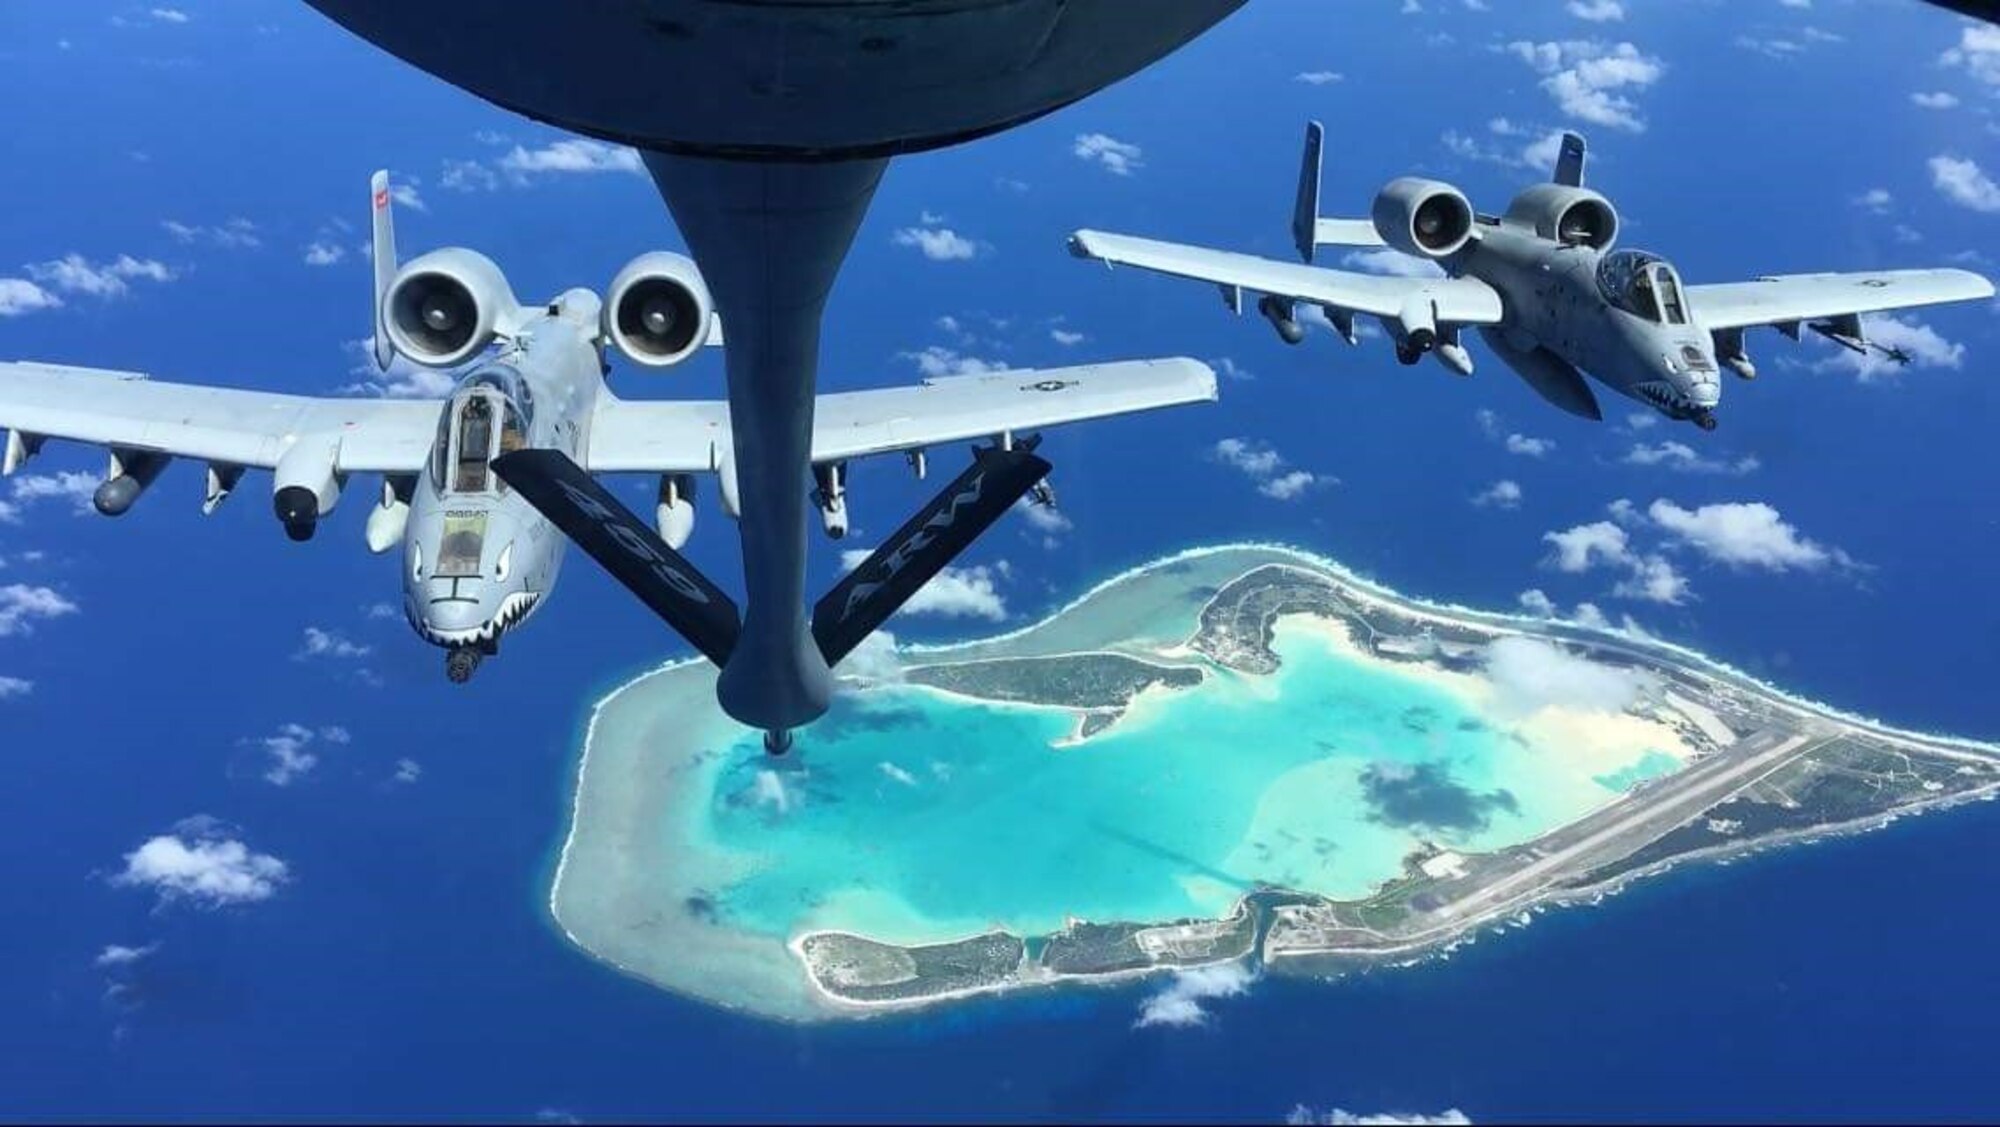 A KC-135 Stratotanker from the 459th Air Refueling Wing’s 756th Air Refueling Squadron trains with two 74th Fighter Squadron A-10C Thunderbolt II aircraft in air refueling missions over the Pacific Ocean on Oct. 23, 2022. The training mission took them over Wake Island pictured beneath the aircraft. Training missions with the Air Force inventory keep the flying skills and boom operations capabilities of the KC-135 air crews sharp. The training also provided all flyers the opportunity to participate in a Dynamic Force Employment exercise to maintain readiness in geographically separated and contested environments.